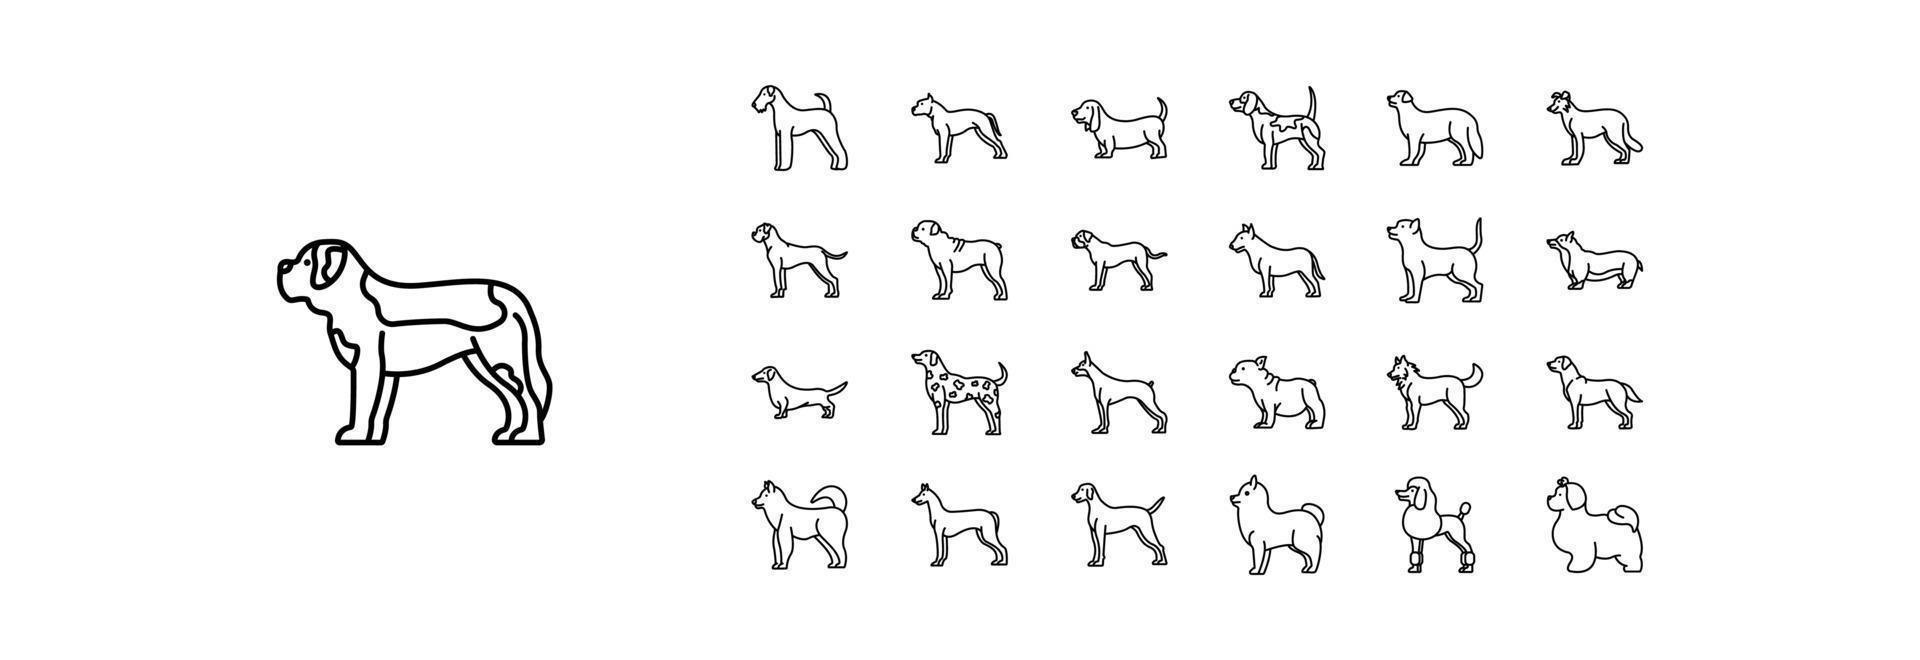 Collection of icons related to Dog Breeds, including icons like Airedale, American Staffordshire and more. vector illustrations, Pixel Perfect set